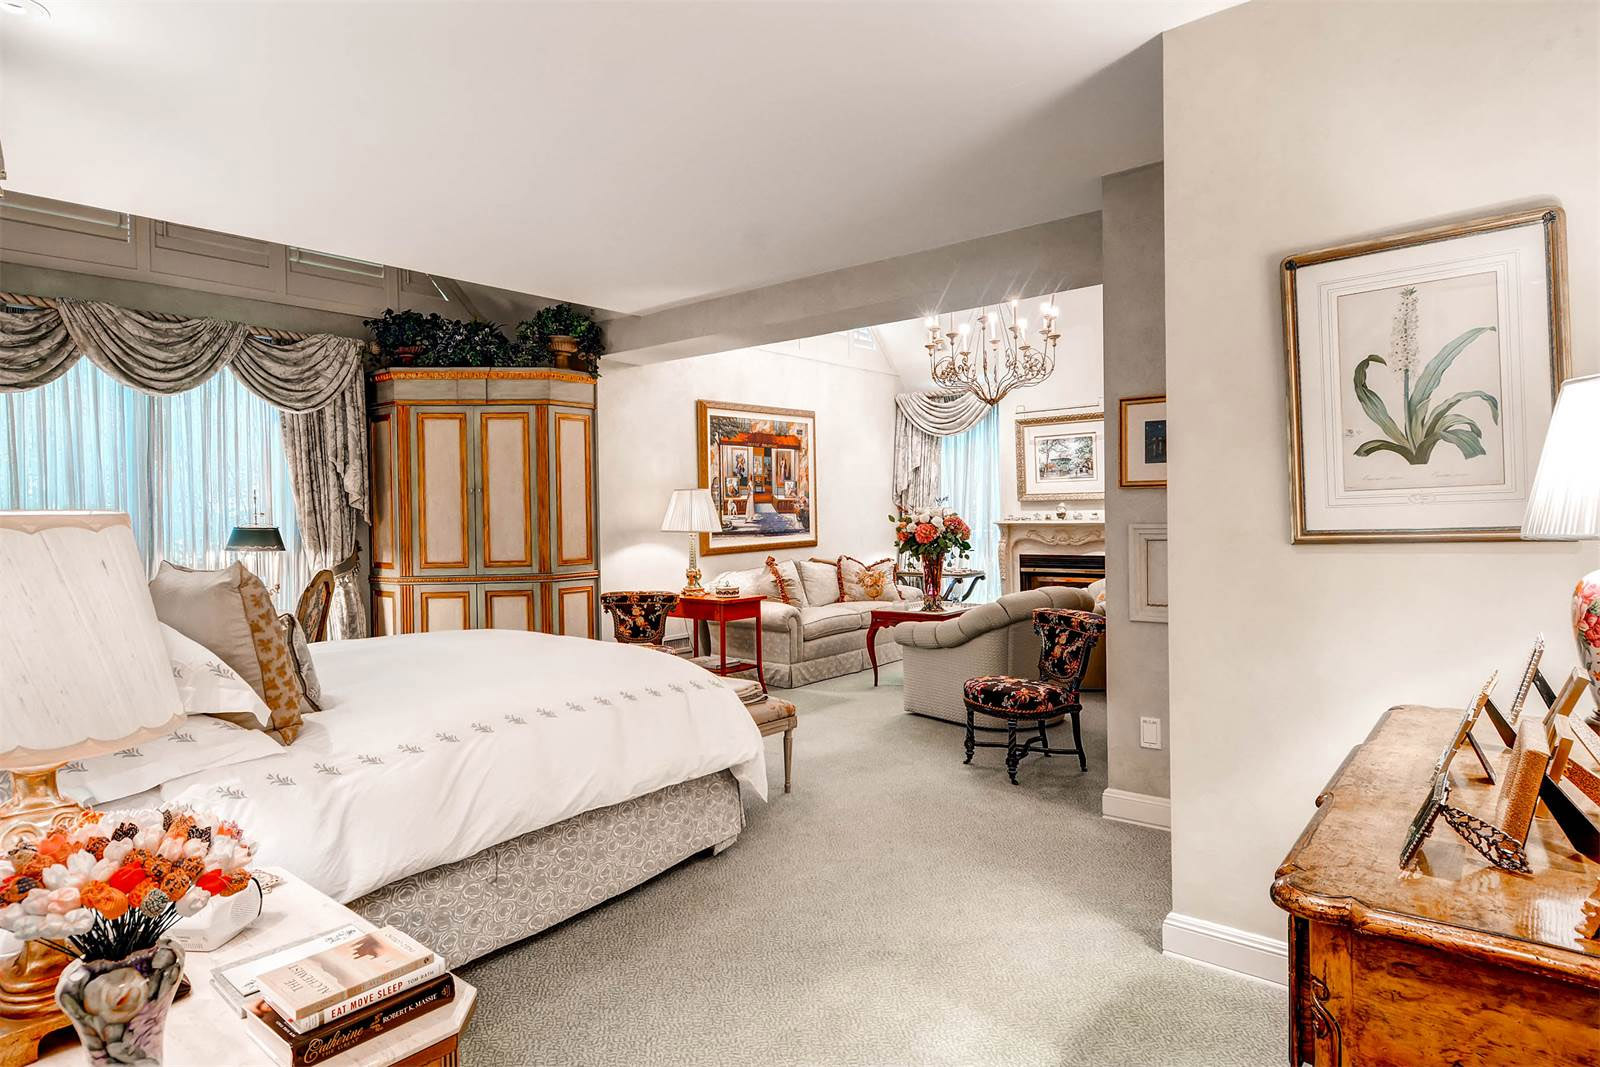 The estate features six bedrooms. The master bedroom has a gas fireplace. (Courtesy Monument Sotheby's International Realty)